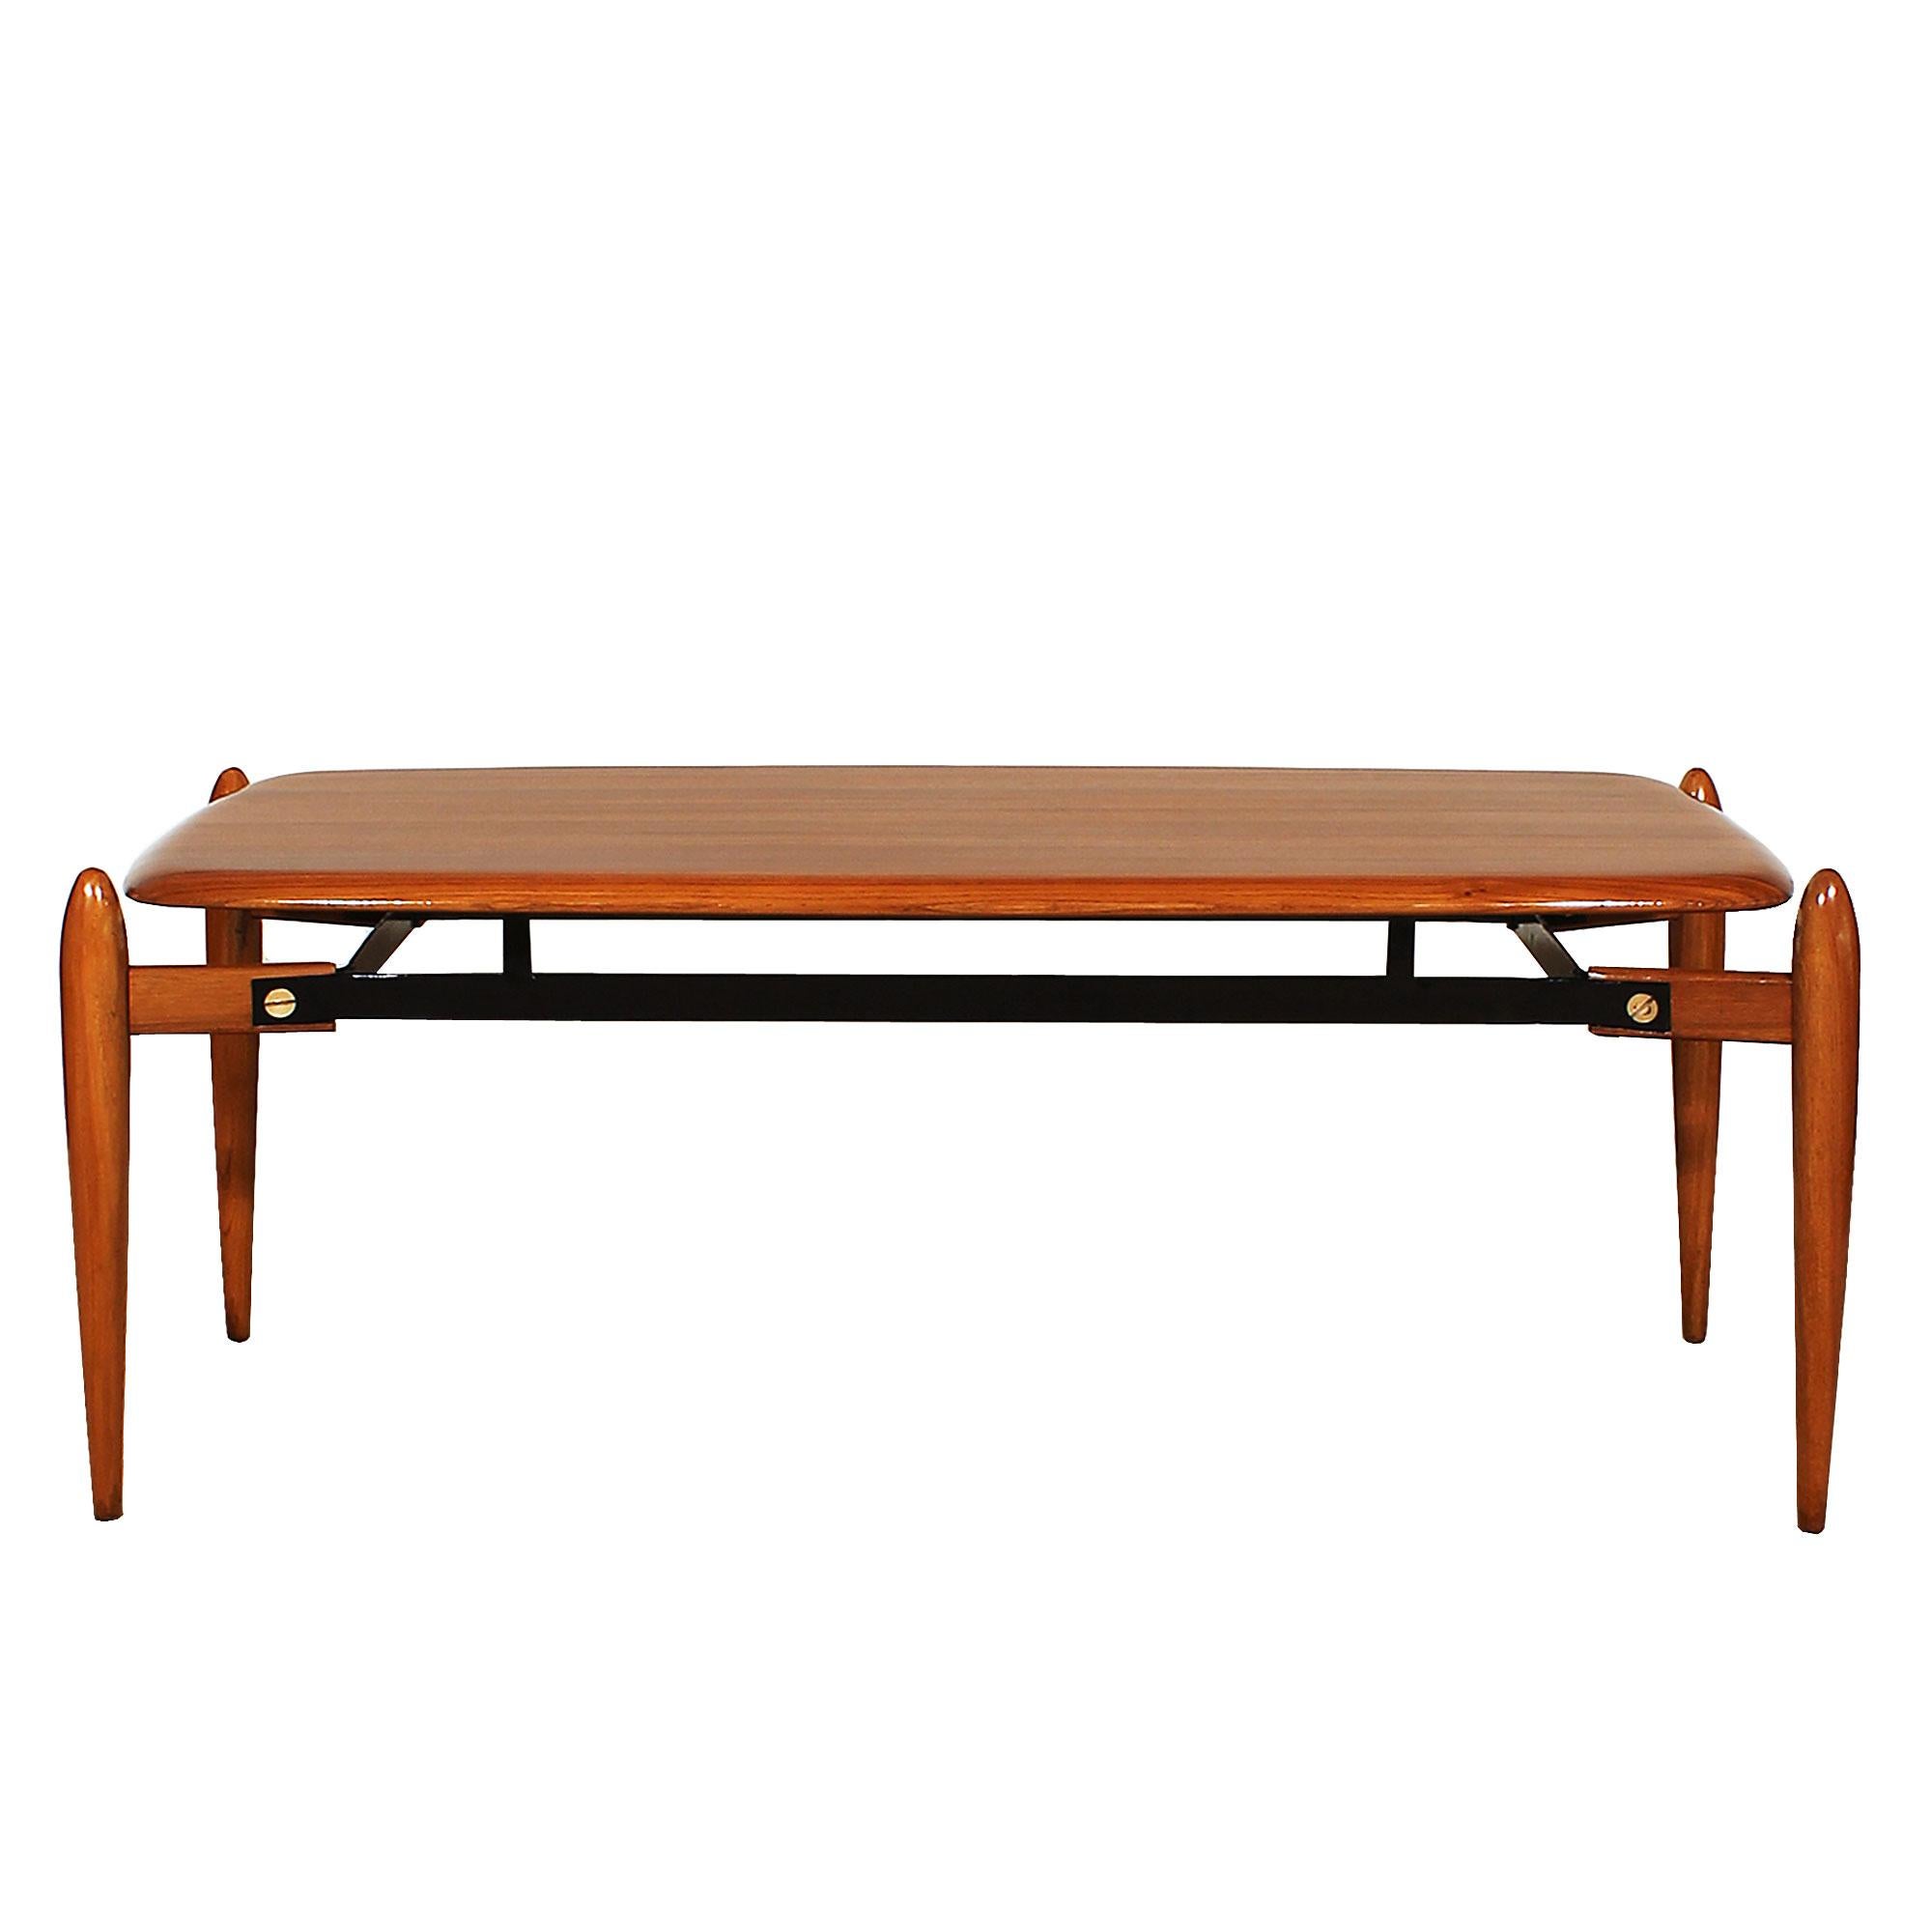 Coffee table in solid teak with ebony strips, french polish, black iron structure with brass hardware.

Italy circa 1950